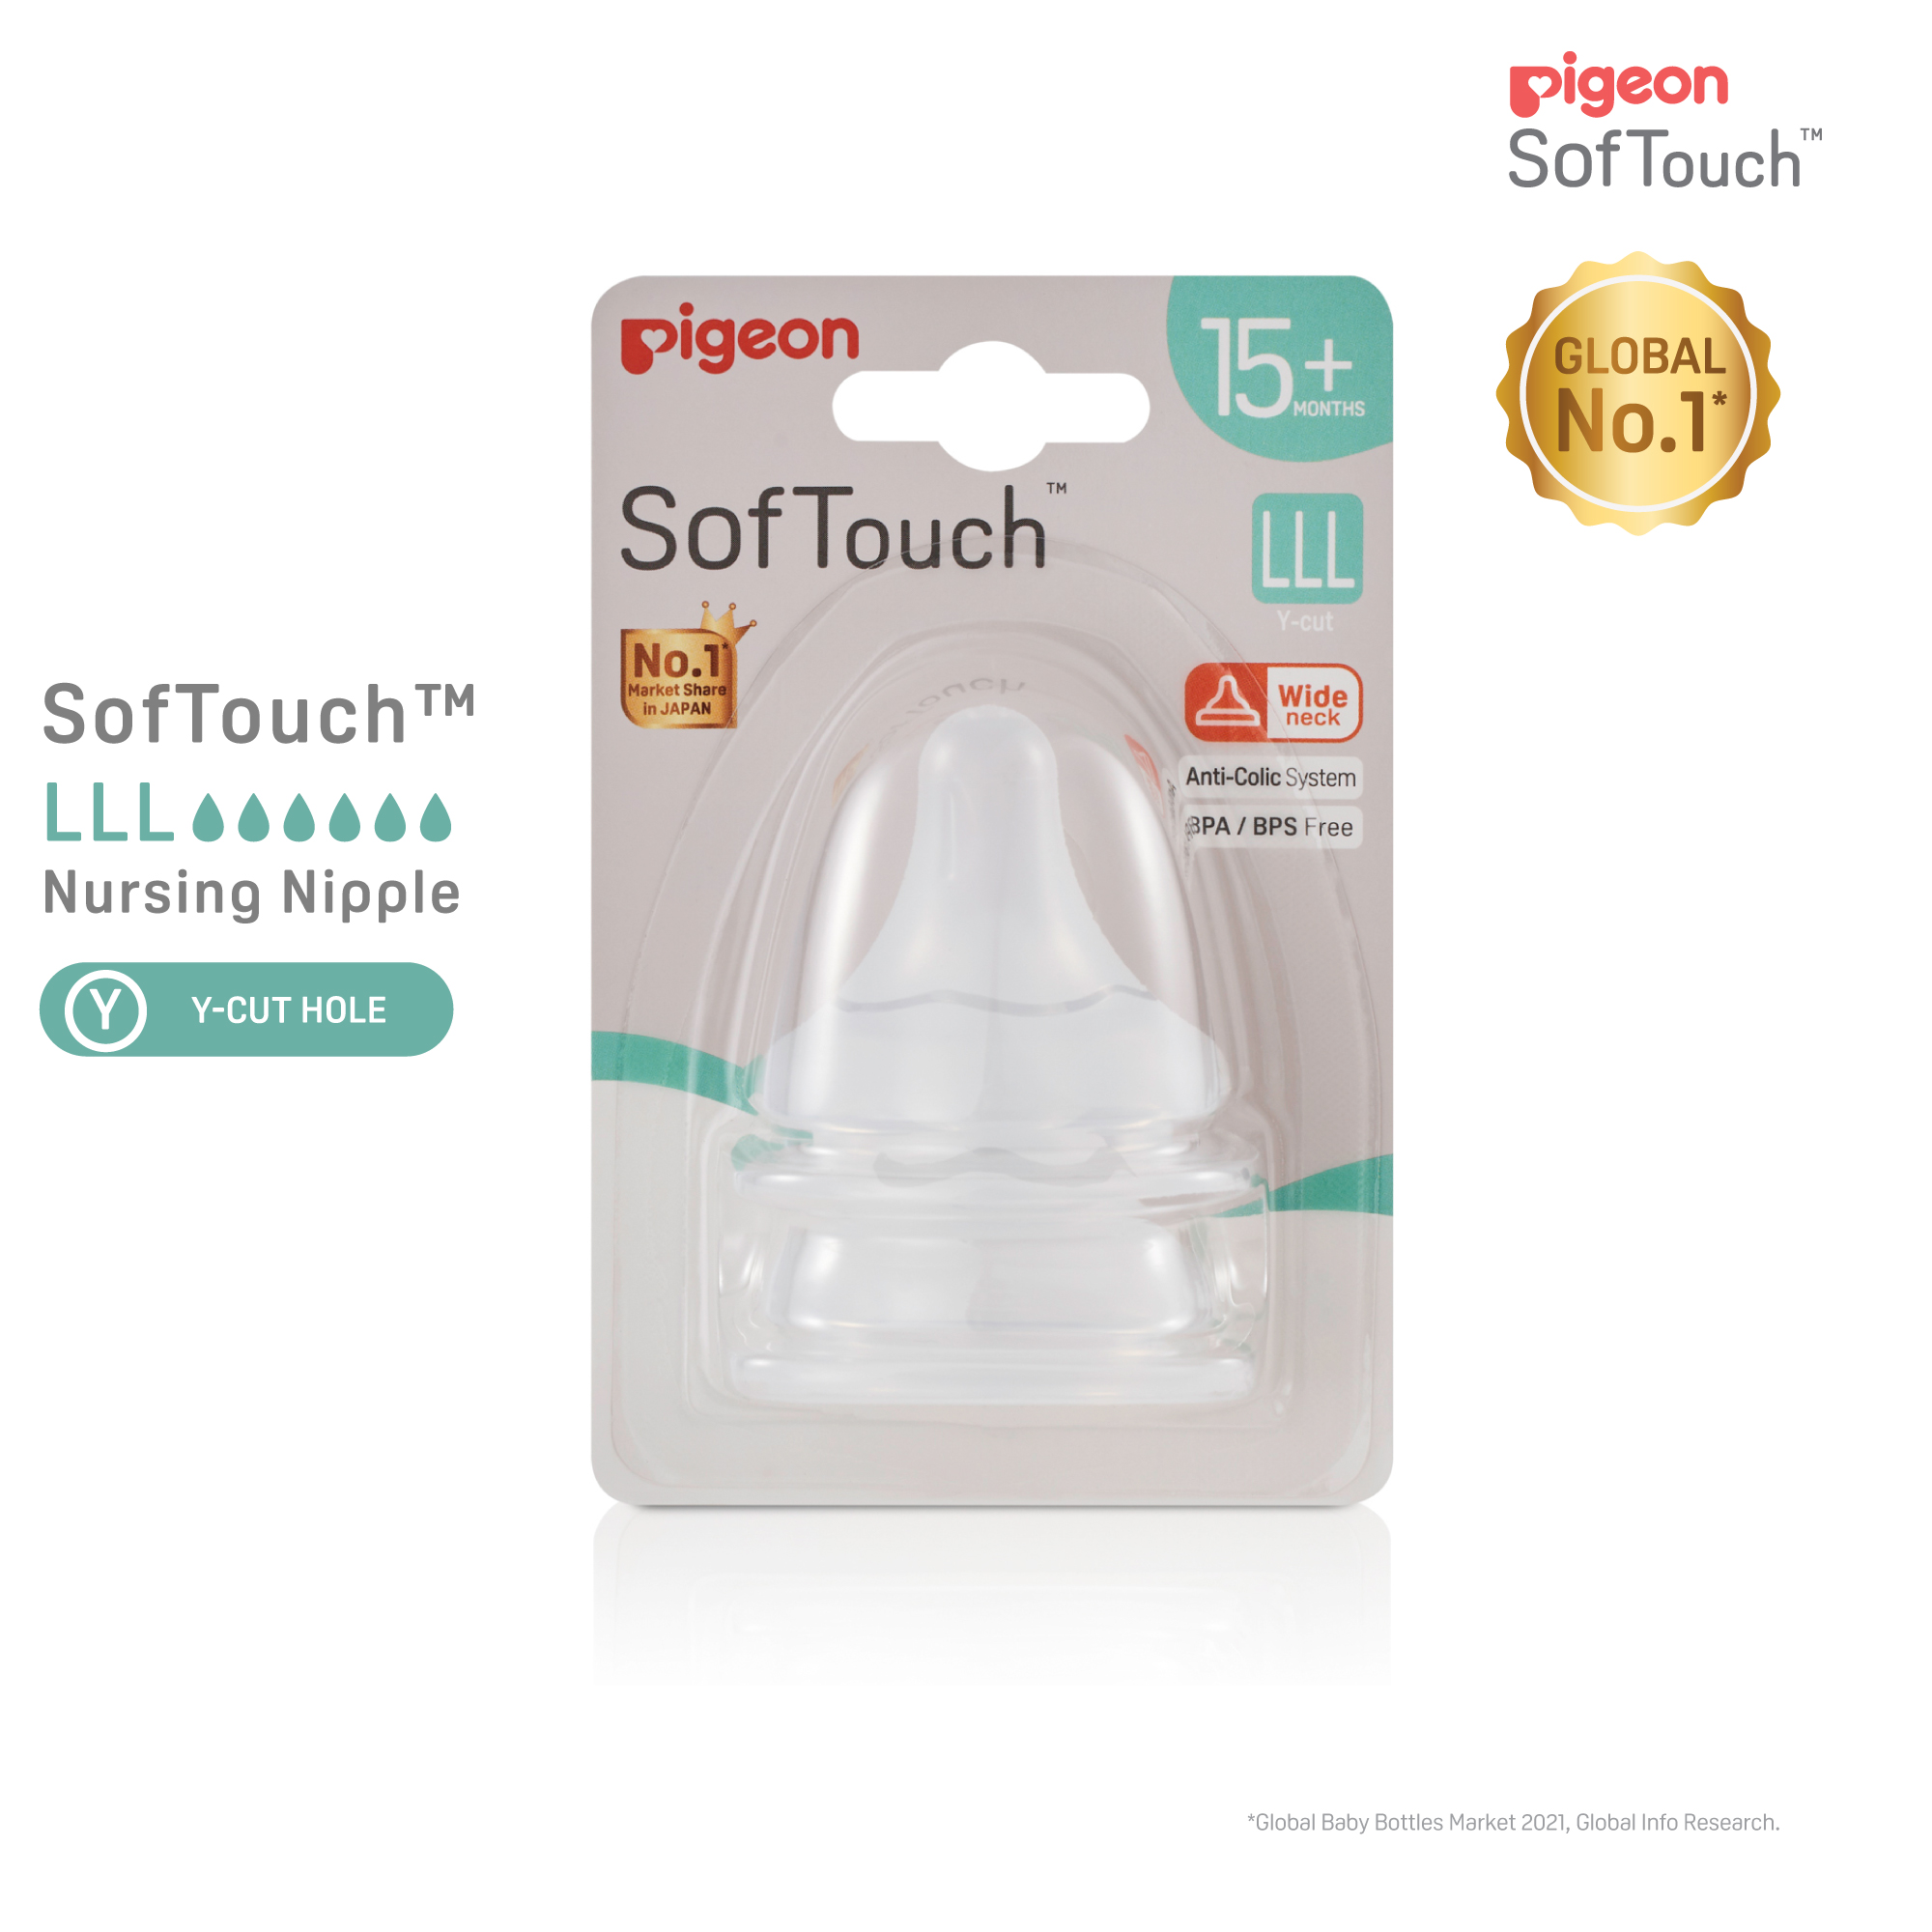 Pigeon SofTouch 3 Nipple Blister Pack 2pcs (LLL) (PG-79466)